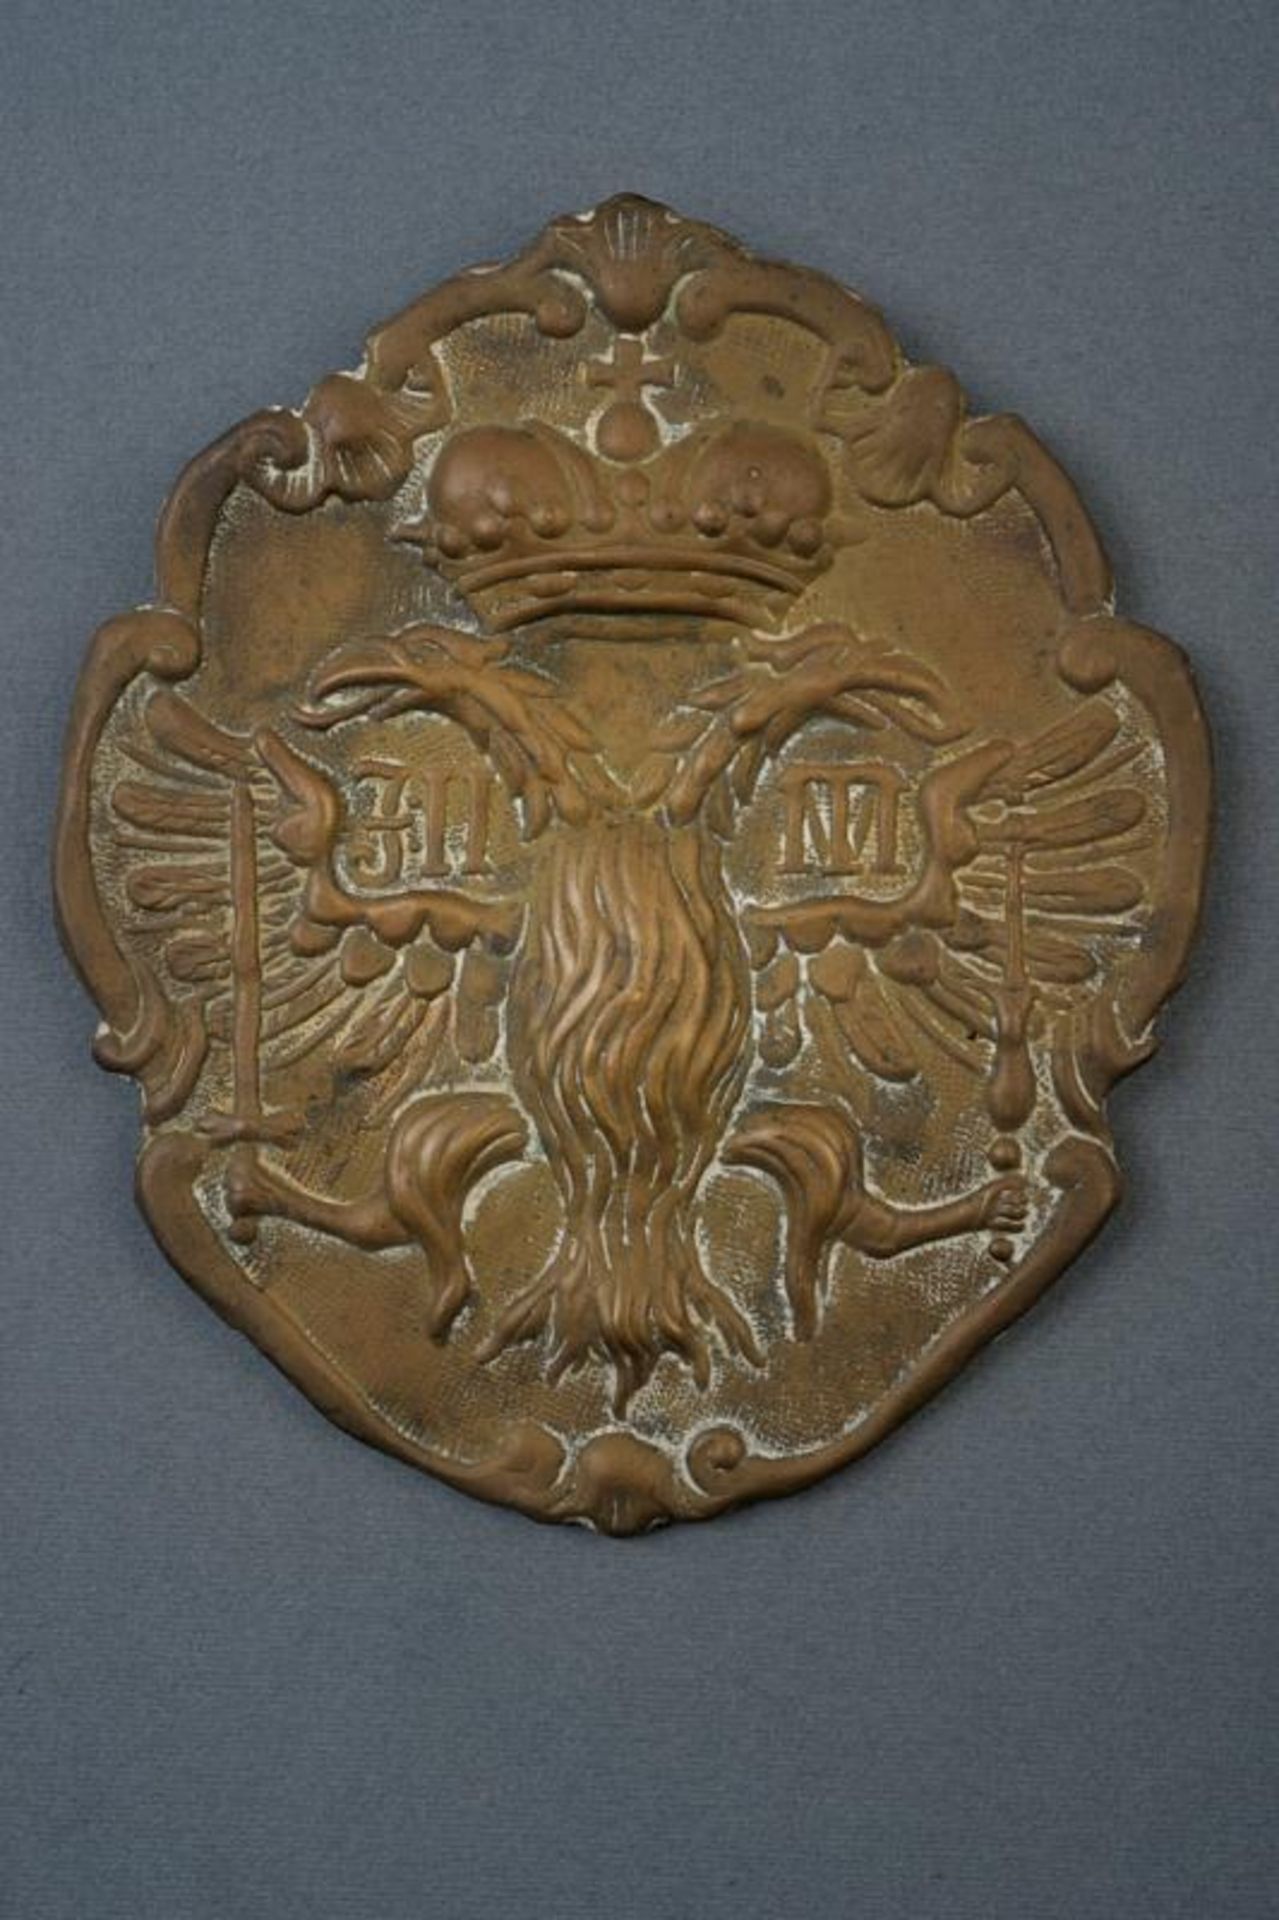 A Helmet badge from the period Francis II an Maria Theresa